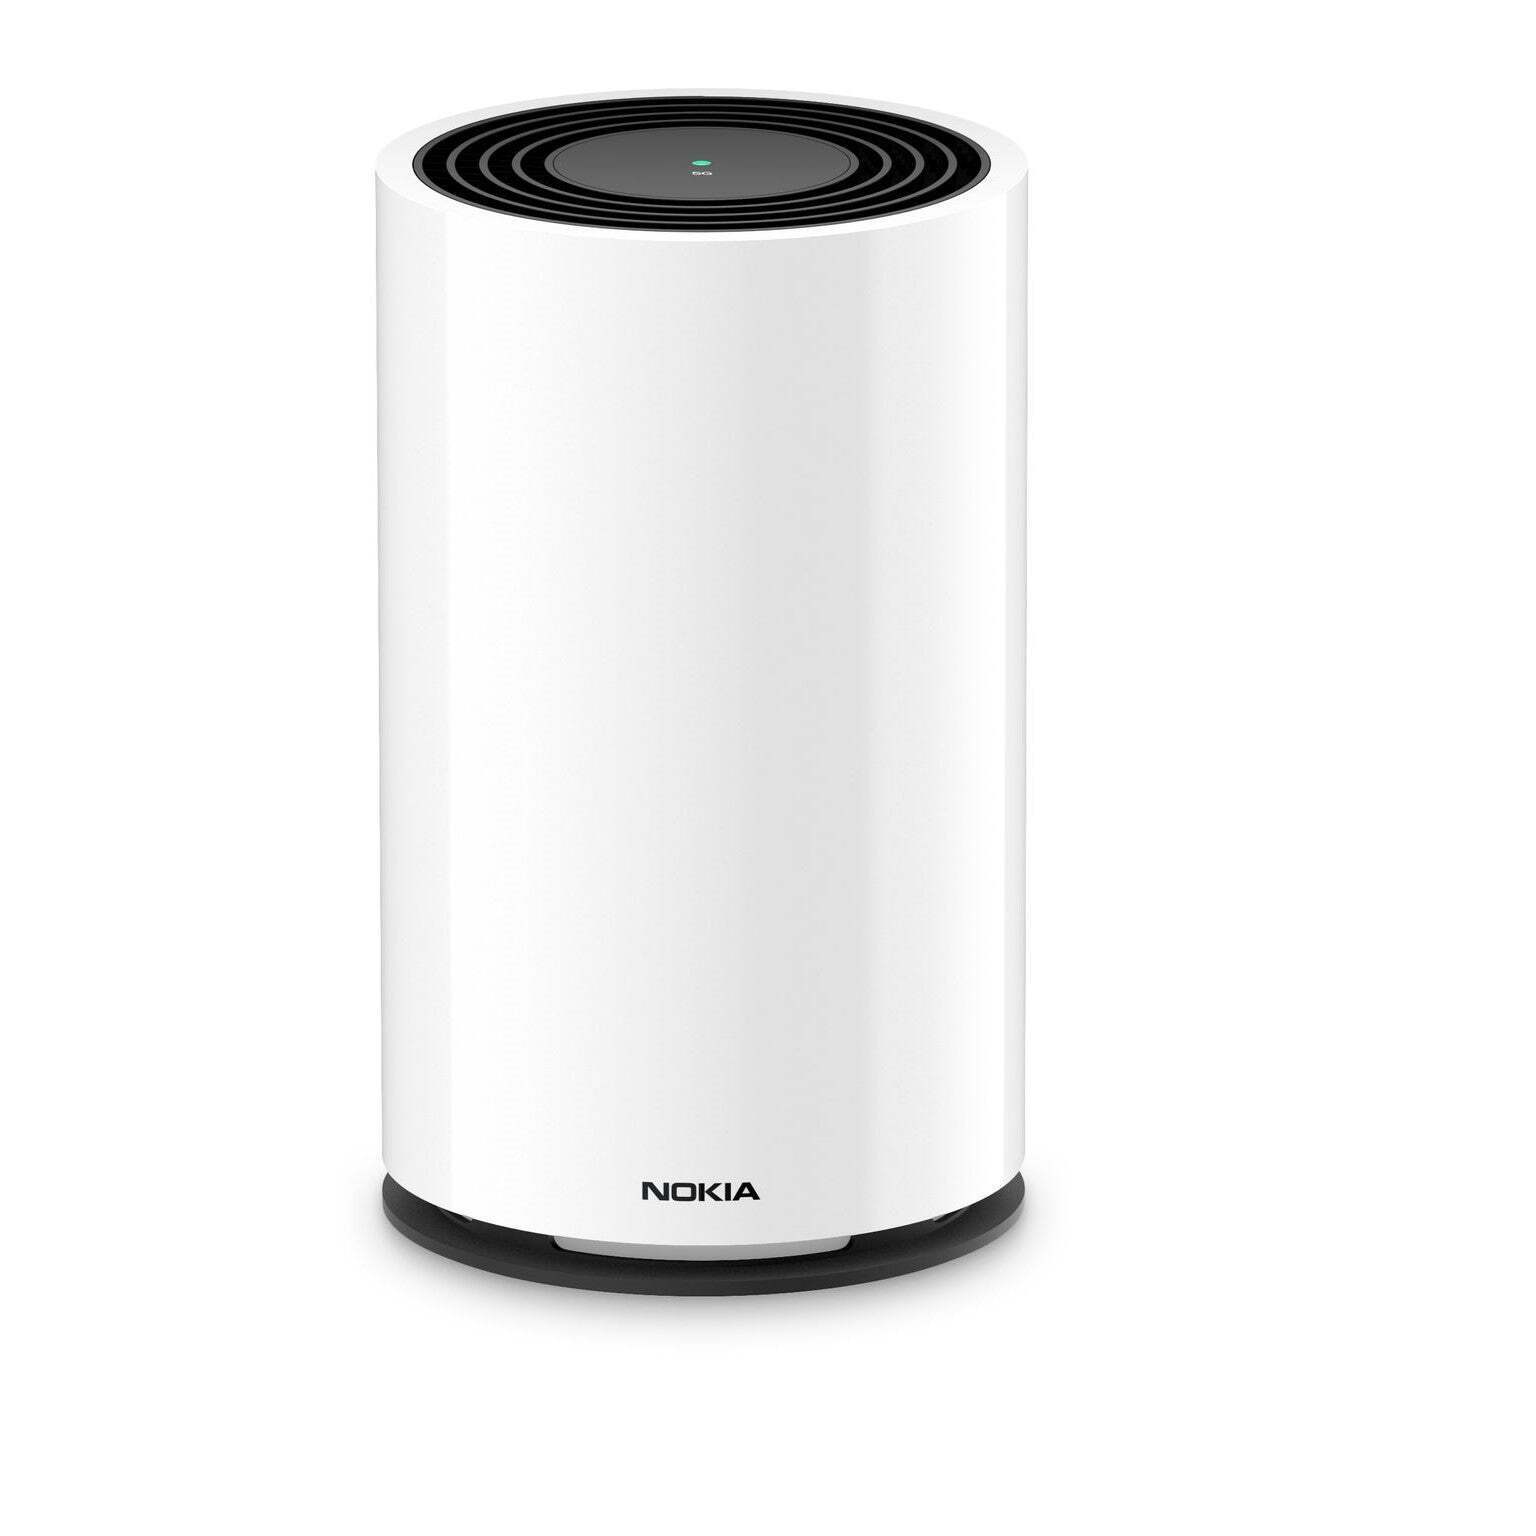 Nokia Fastmile 5G Router, Unlocked